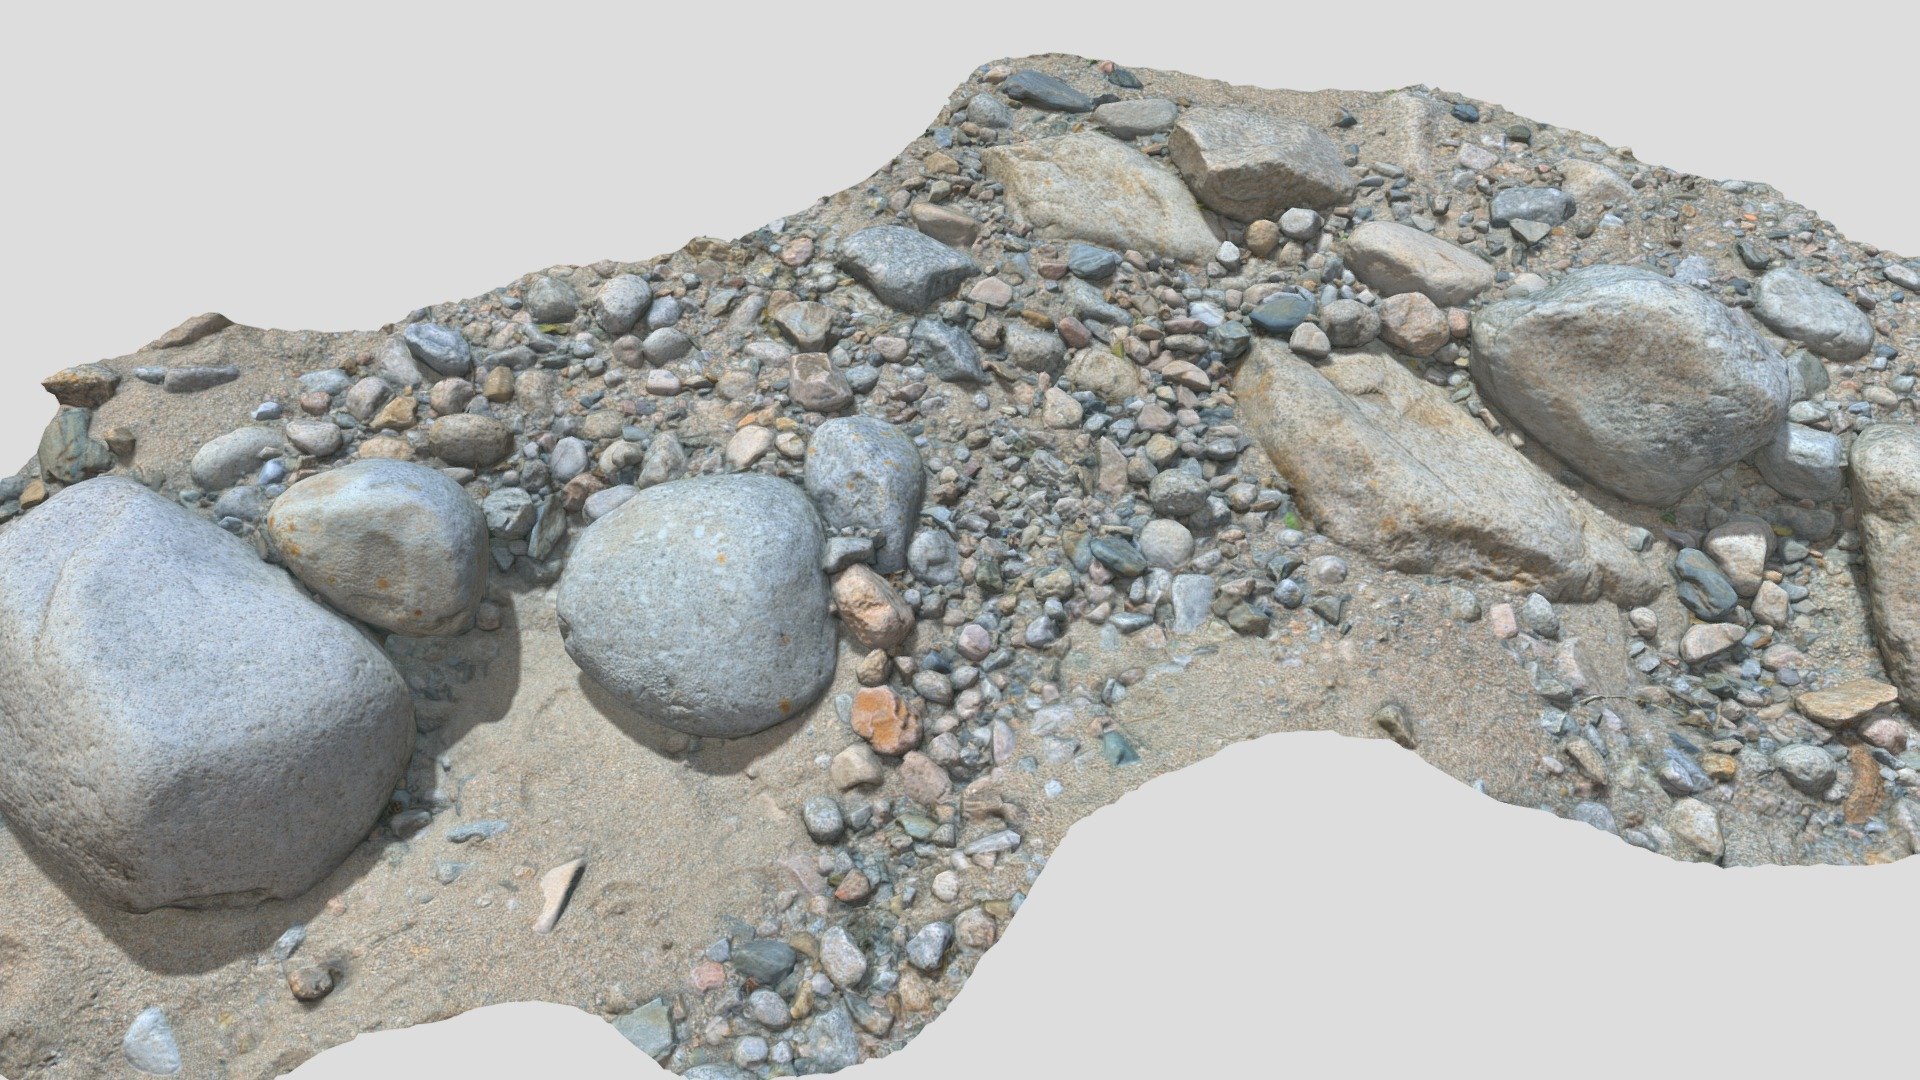 Fully processed 3D scans: no light information, color-matched, etc. 

Ready to use for all kind of CGI

Source Contains:





.blend




.obj




.fbx



8K Textures for each model:





normal




albedo




roughness



Please let me know if something isn’t working as it should.

River Stone Pebbles Sand Rocks Scan - River Stone Pebbles Sand Rocks Scan - Buy Royalty Free 3D model by Per's Scan Collection (@perz_scans) 3d model